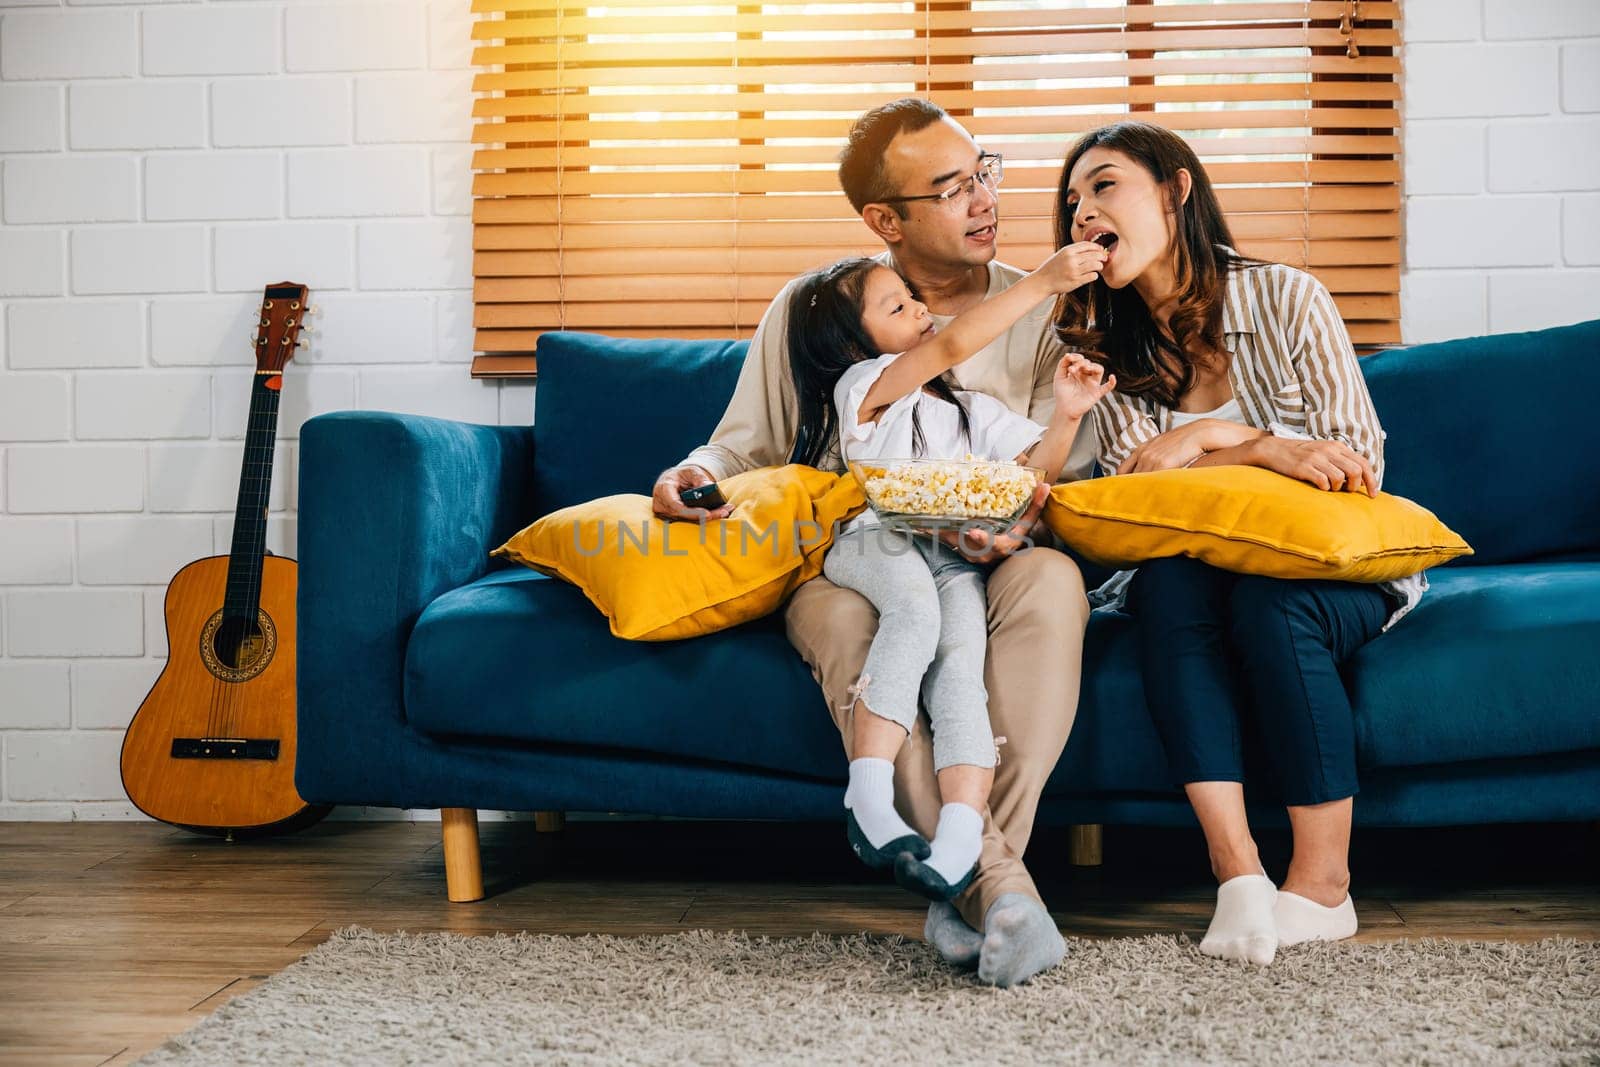 family finds relaxation and joy while watching TV with popcorn at home. father mother son daughter and schoolgirl share moments of happiness creating cherished memories during their quality time.